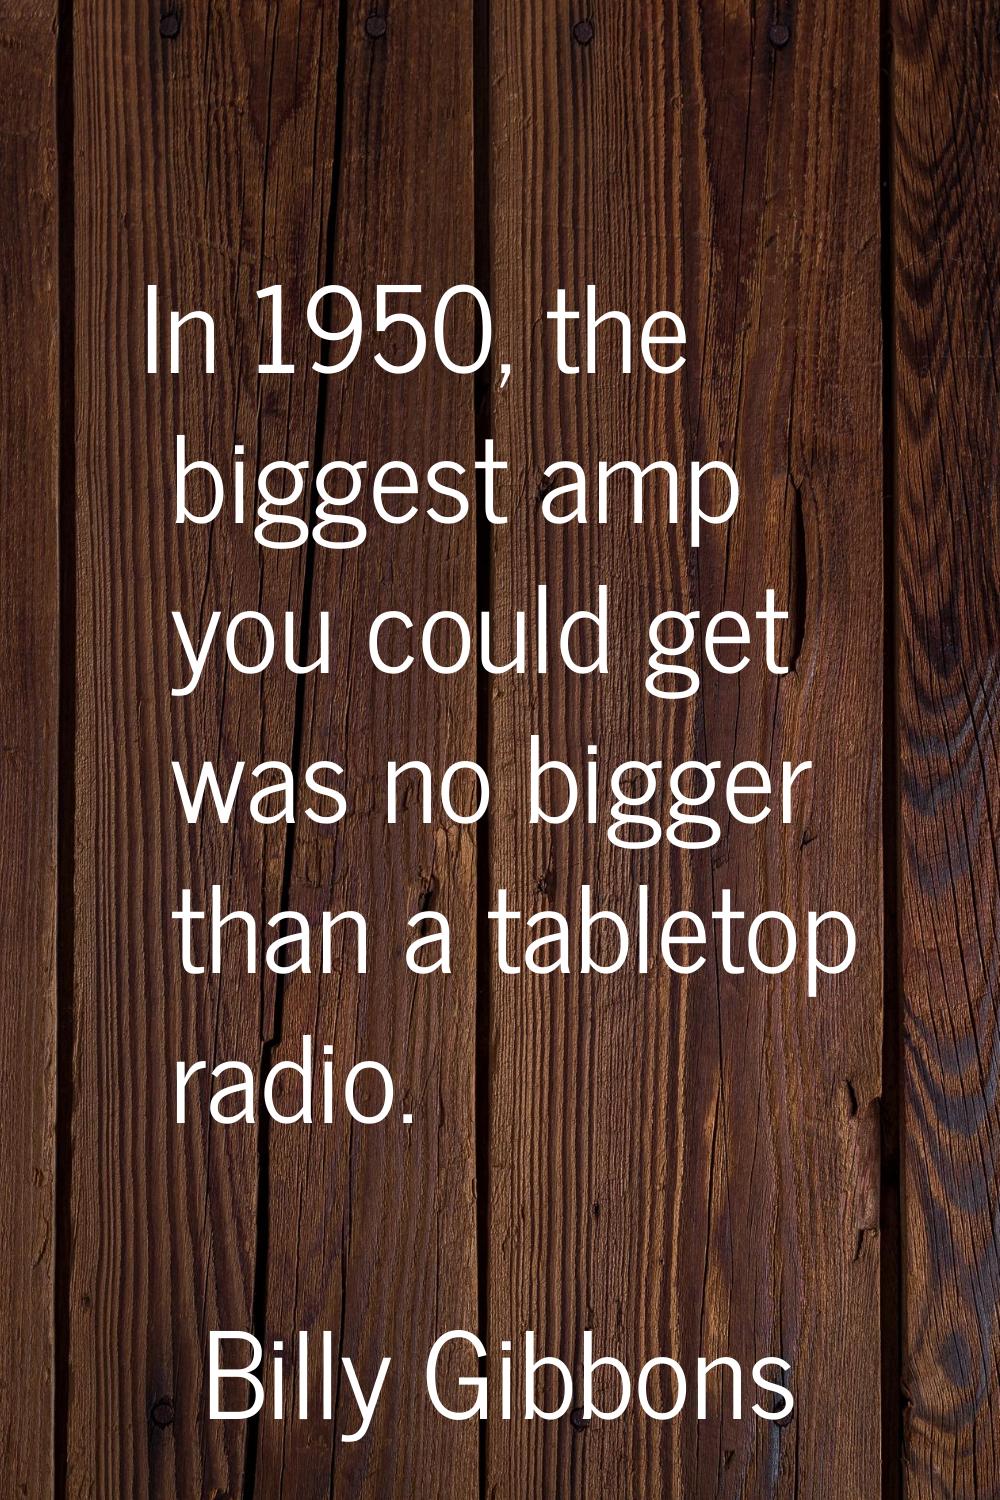 In 1950, the biggest amp you could get was no bigger than a tabletop radio.